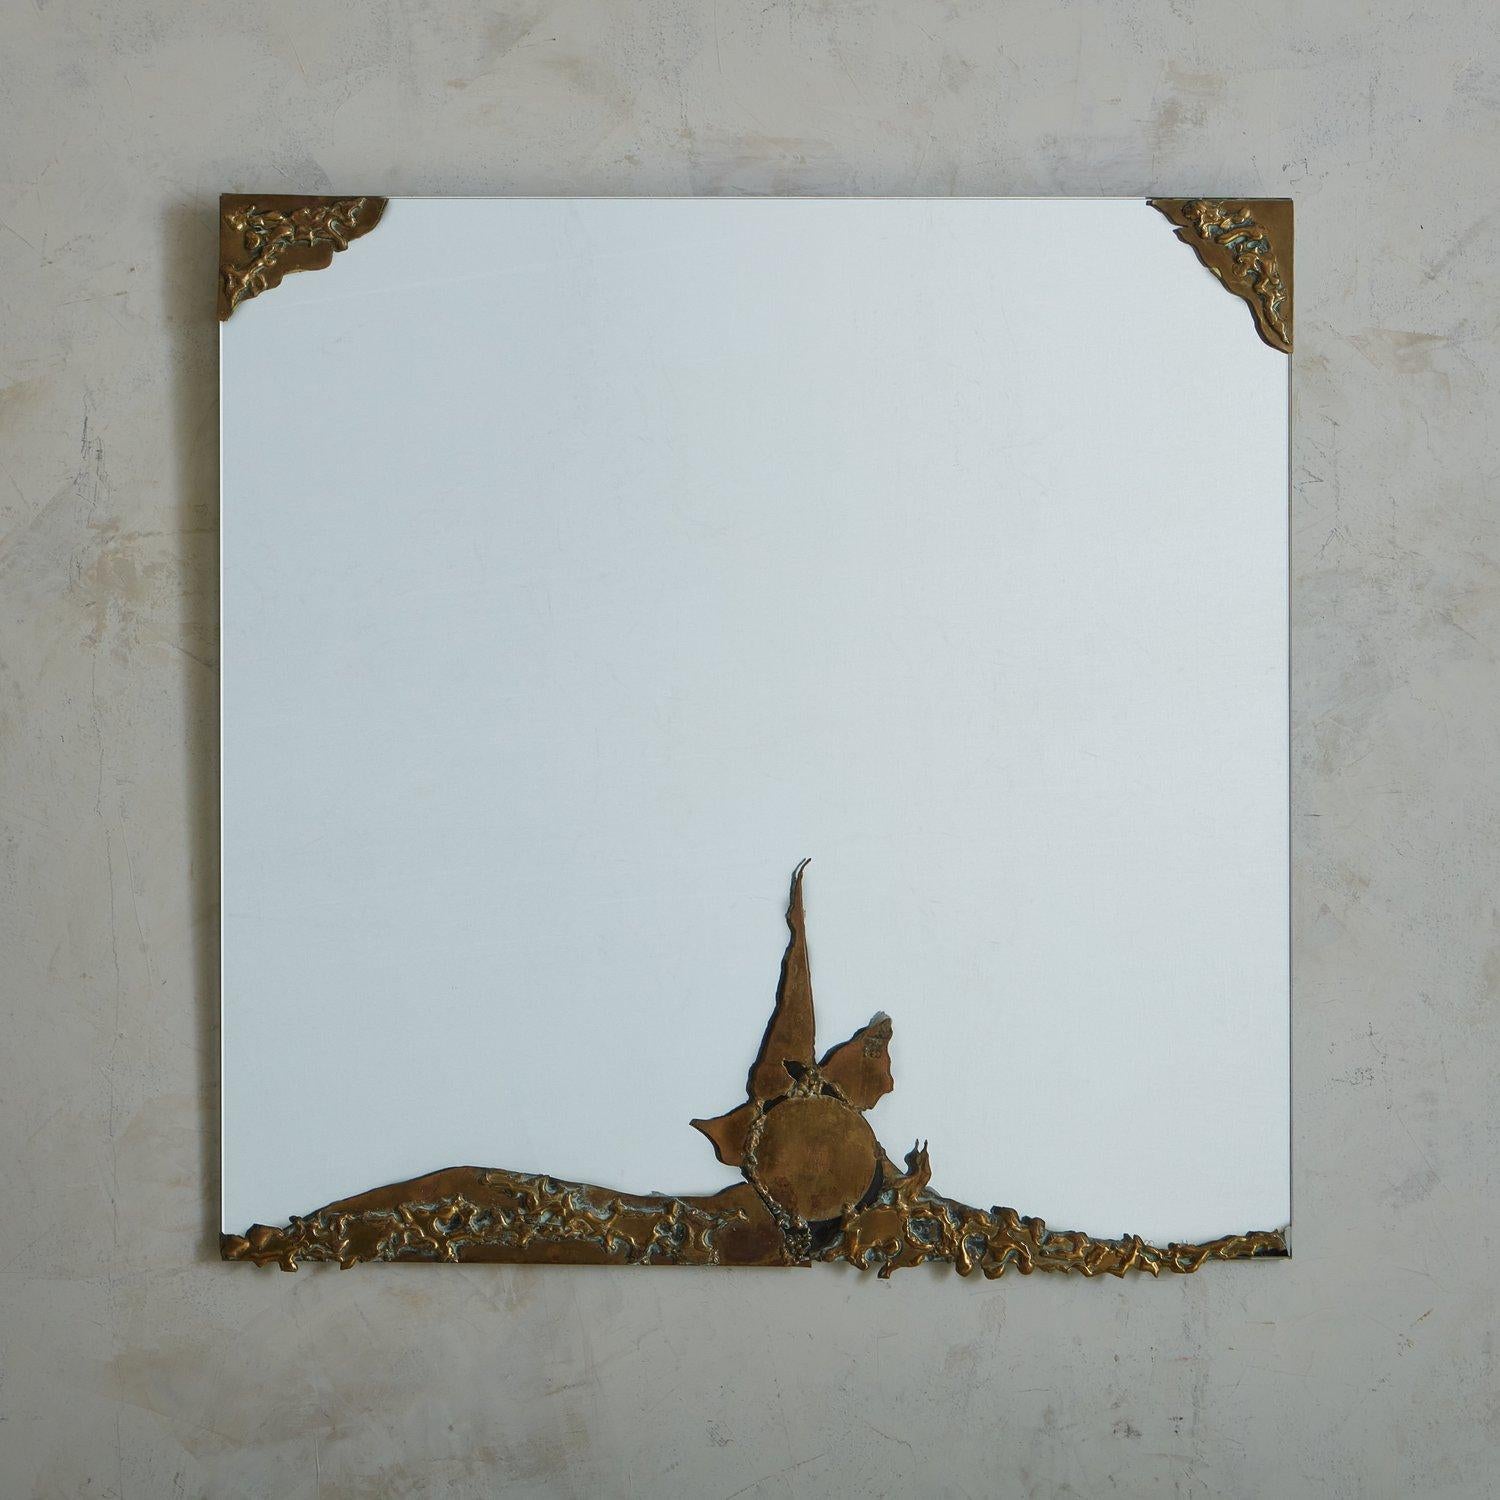 A 1970s French Art Nouveau style wall mirror featuring a partial textured bronze frame with gorgeous patina. The bronze detailing frames the top corners and extends artfully along the bottom of the mirror. Sourced in France, 1970s. 